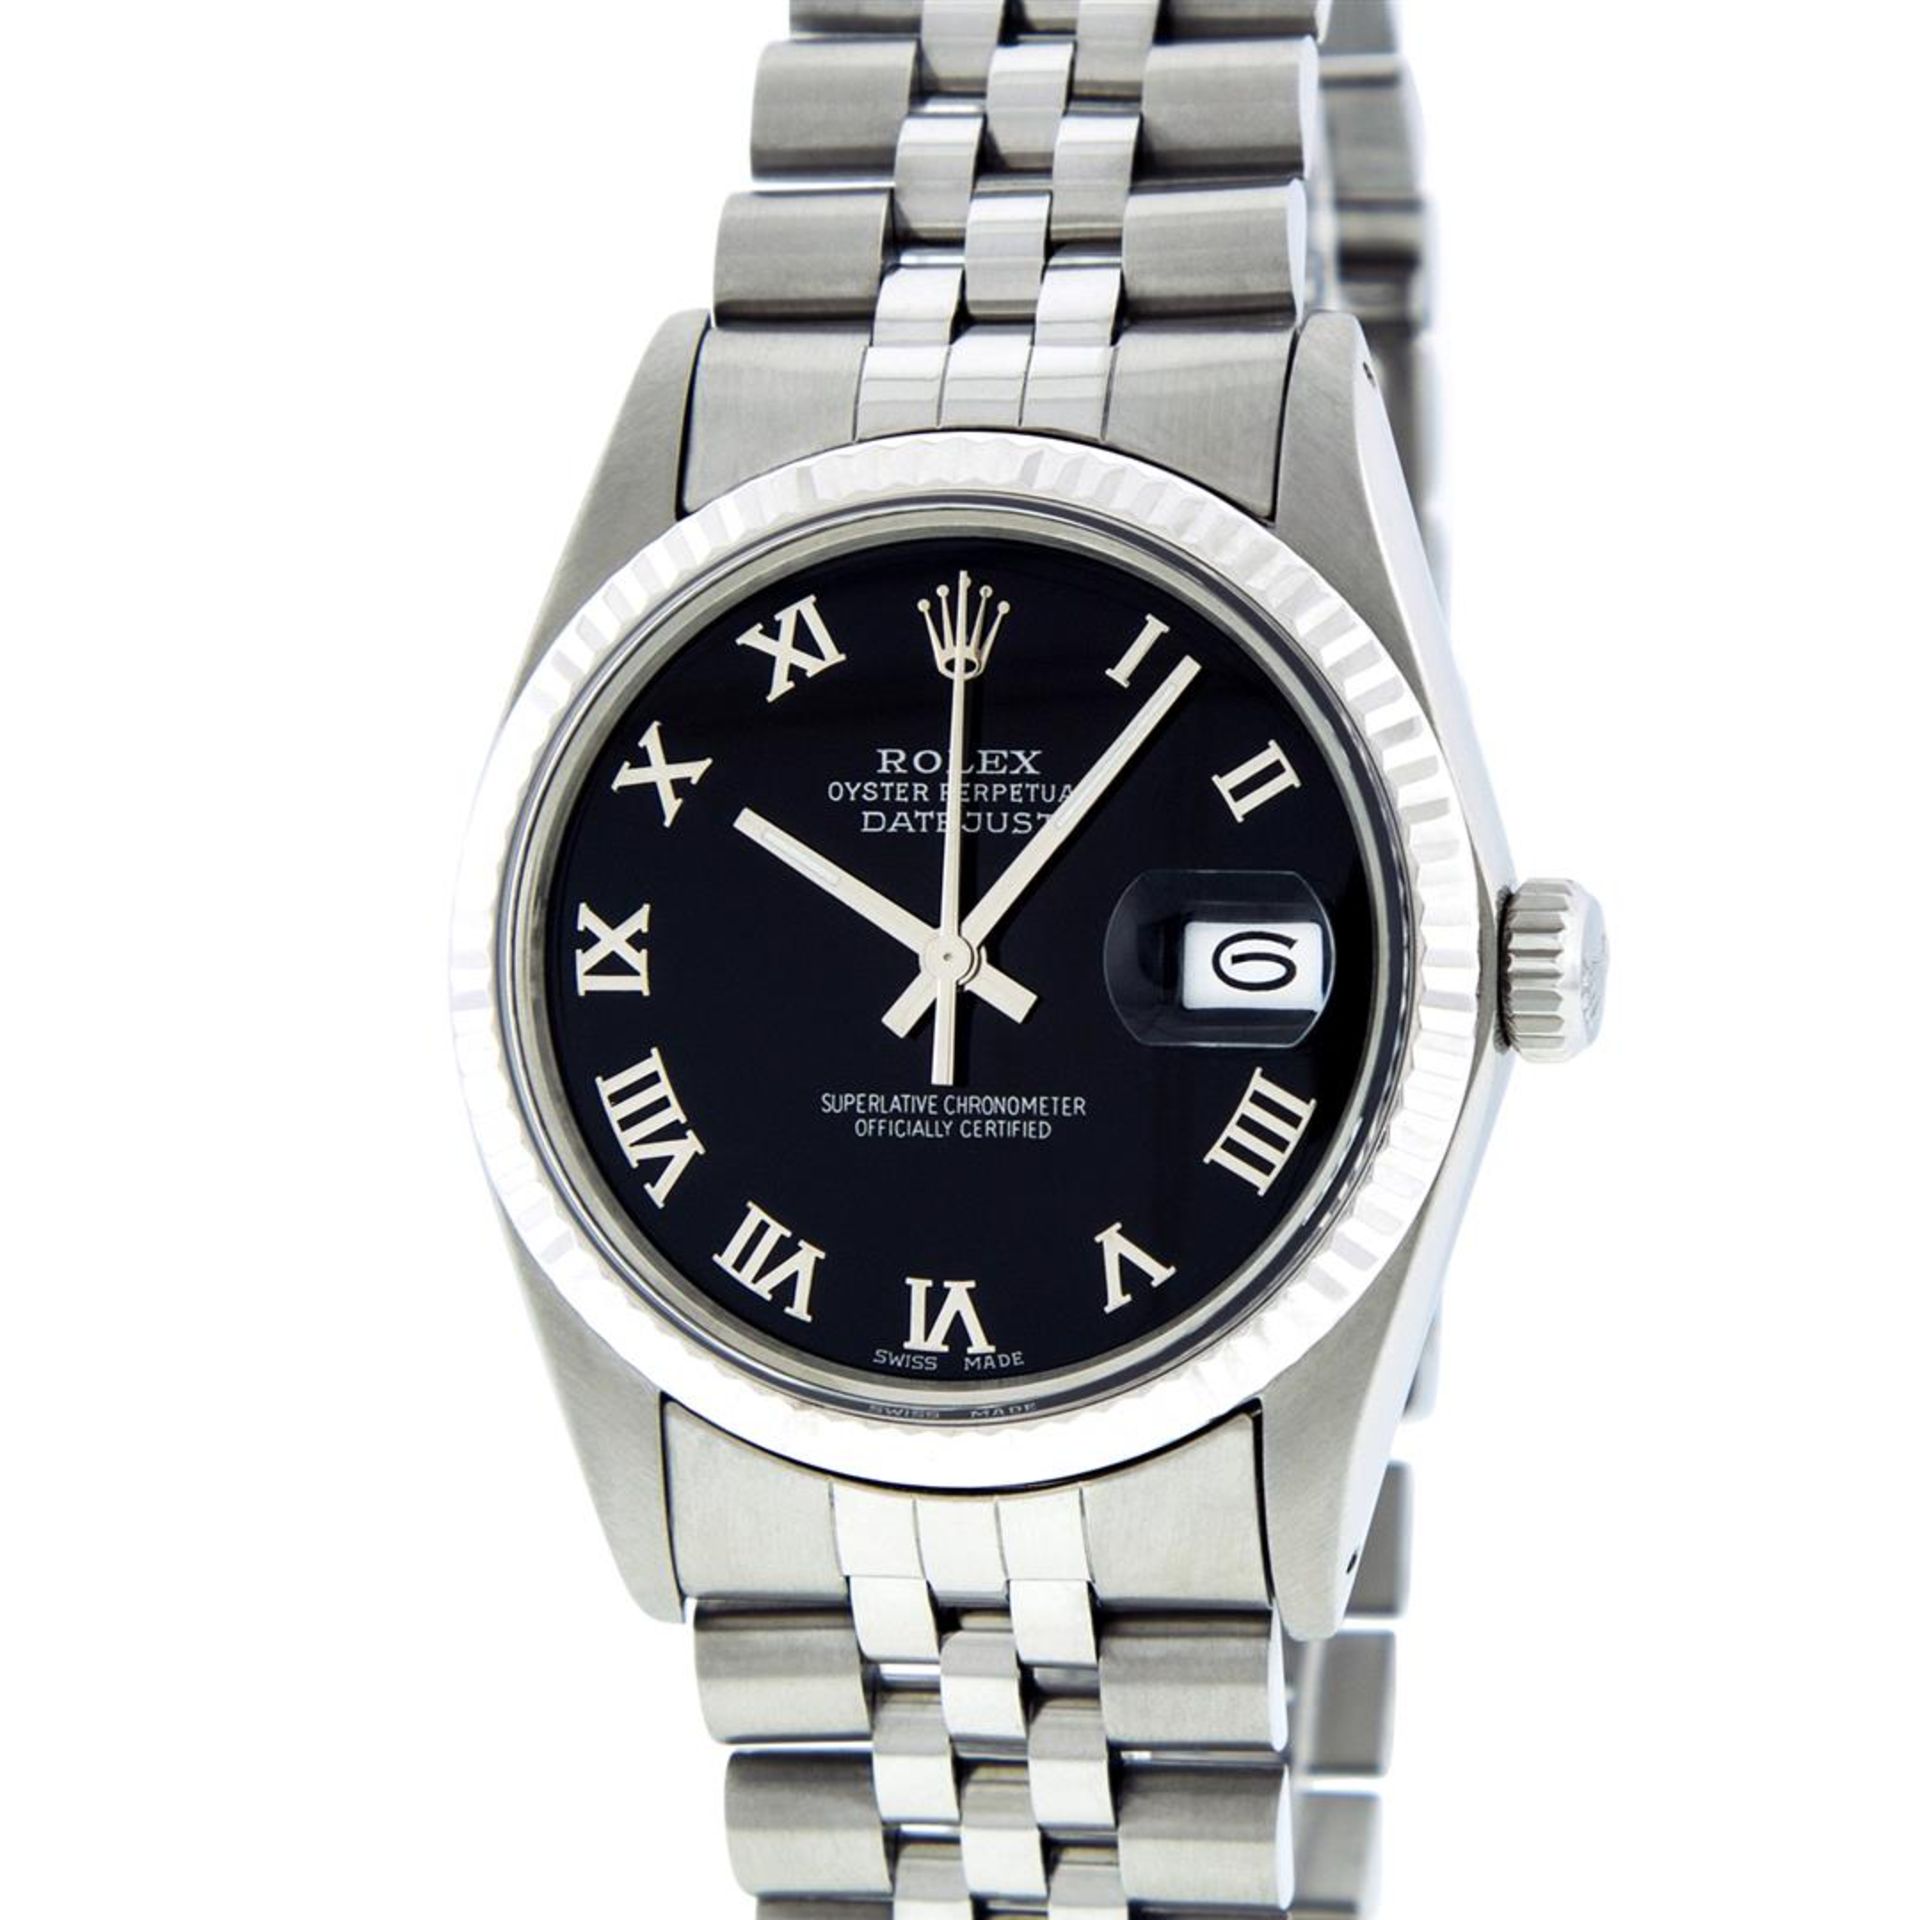 Rolex Mens Stainless Steel Black Roman Datejust 36MM Wriswatch Datejust - Image 2 of 8